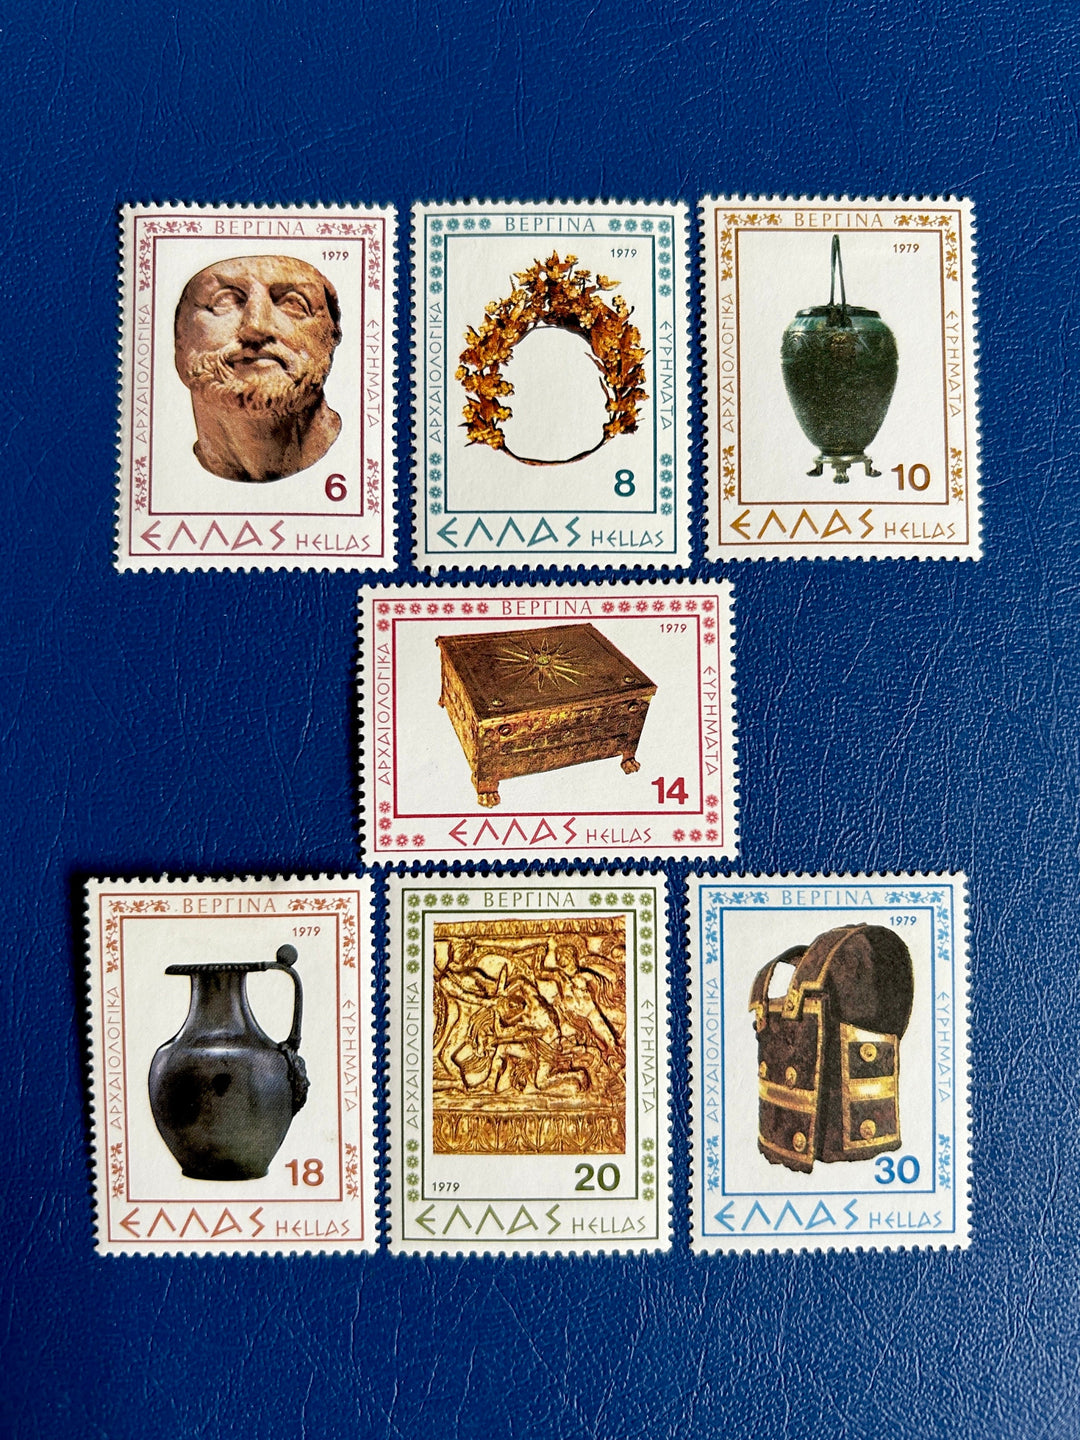 Greece - Original Vintage Postage Stamps- 1979 - Archaeology Finding Vergina - for the collector, artist or collector